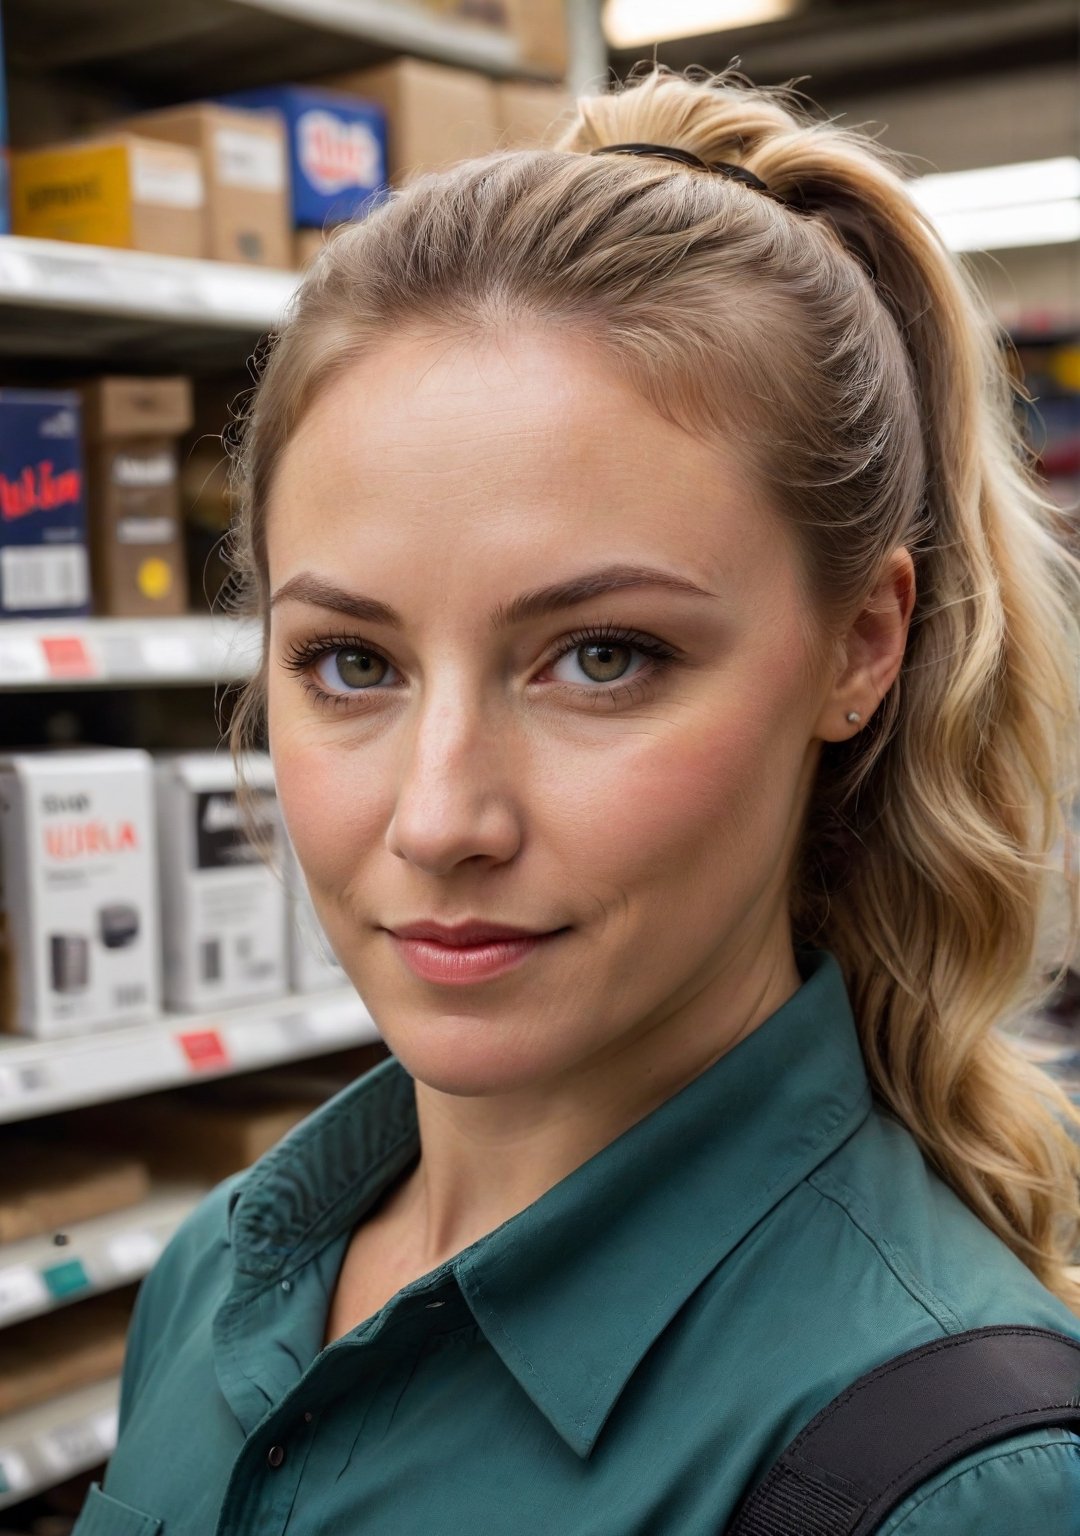 Hardware store view of a British electrician, 32 years old, showcasing a blend of competence and subtle allure, with a focused, approachable face, found amidst the aisles of a busy London hardware shop. She's confidently advising a customer on electrical supplies, her posture relaxed yet authoritative, a hint of a smile suggesting both expertise and charm.

Her hair, a soft, sandy blonde, is tied back in a practical ponytail, strands occasionally escaping to frame her face. Her eyes, clear and attentive, make direct, engaging contact with those she's helping, her lips curved in an easy, inviting smile.

She has a fit, capable build. Wearing a (fitted work shirt) tucked into (durable utility trousers), her attire is functional yet flattering, complementing her professional role. Her feet, in (sturdy safety boots), are firmly planted on the ground, her whole demeanor exuding a sense of reliability and a welcoming air of approachability.
 8k uhd, dslr, soft lighting, high quality, film grain, Fujifilm XT3, high quality photography, 3 point lighting, flash with softbox, 4k, Canon EOS R3, hdr, smooth, sharp focus, high resolution, award winning photo, 80mm, f2.8, bokeh, (Highest Quality, 4k, masterpiece, Amazing Details:1.1), film grain, Fujifilm XT3, photography,
detailed eyes, epic, dramatic, fantastical, full body, intricate design and details, dramatic lighting, hyperrealism, photorealistic, cinematic, 8k, detailed face. Extremely Realistic, art by sargent, PORTRAIT PHOTO, Aligned eyes, Iridescent Eyes, (blush, eye_wrinkles:0.6), (goosebumps:0.5), subsurface scattering, ((skin pores)), (detailed skin texture), (( textured skin)), realistic dull (skin noise), visible skin detail, skin fuzz, dry skin, hyperdetailed face, sharp picture, sharp detailed, (((analog grainy photo vintage))), Rembrandt lighting, ultra focus, illuminated face, detailed face, 8k resolution
,photo r3al,Extremely Realistic,aw0k euphoric style,PORTRAIT PHOTO,Enhanced Reality